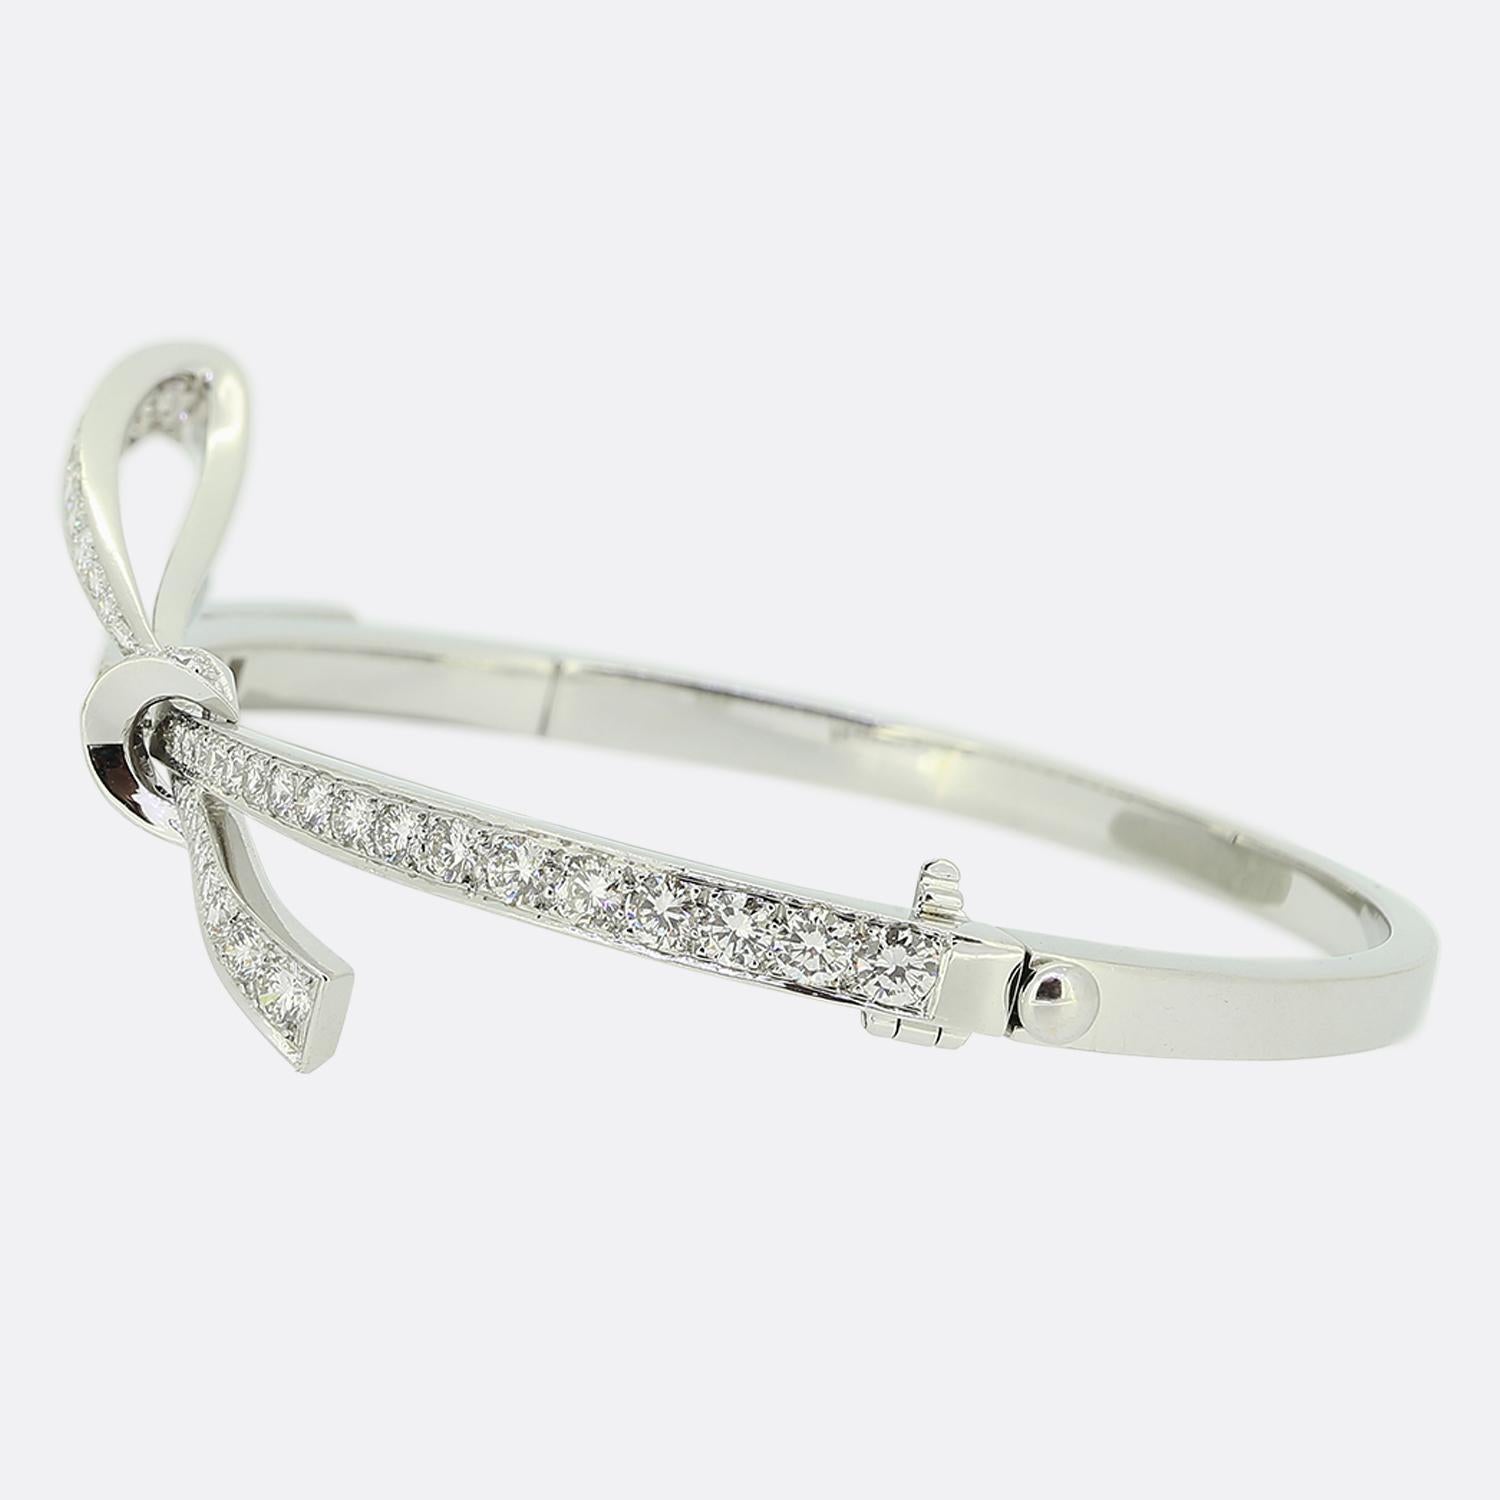 Here we have a lovely diamond bangle crafted in France from 18ct white gold. This piece showcases a ribbon styled upper section with a looping knot design which has been pavé set with 59 variously sized round brilliant cut diamonds. This